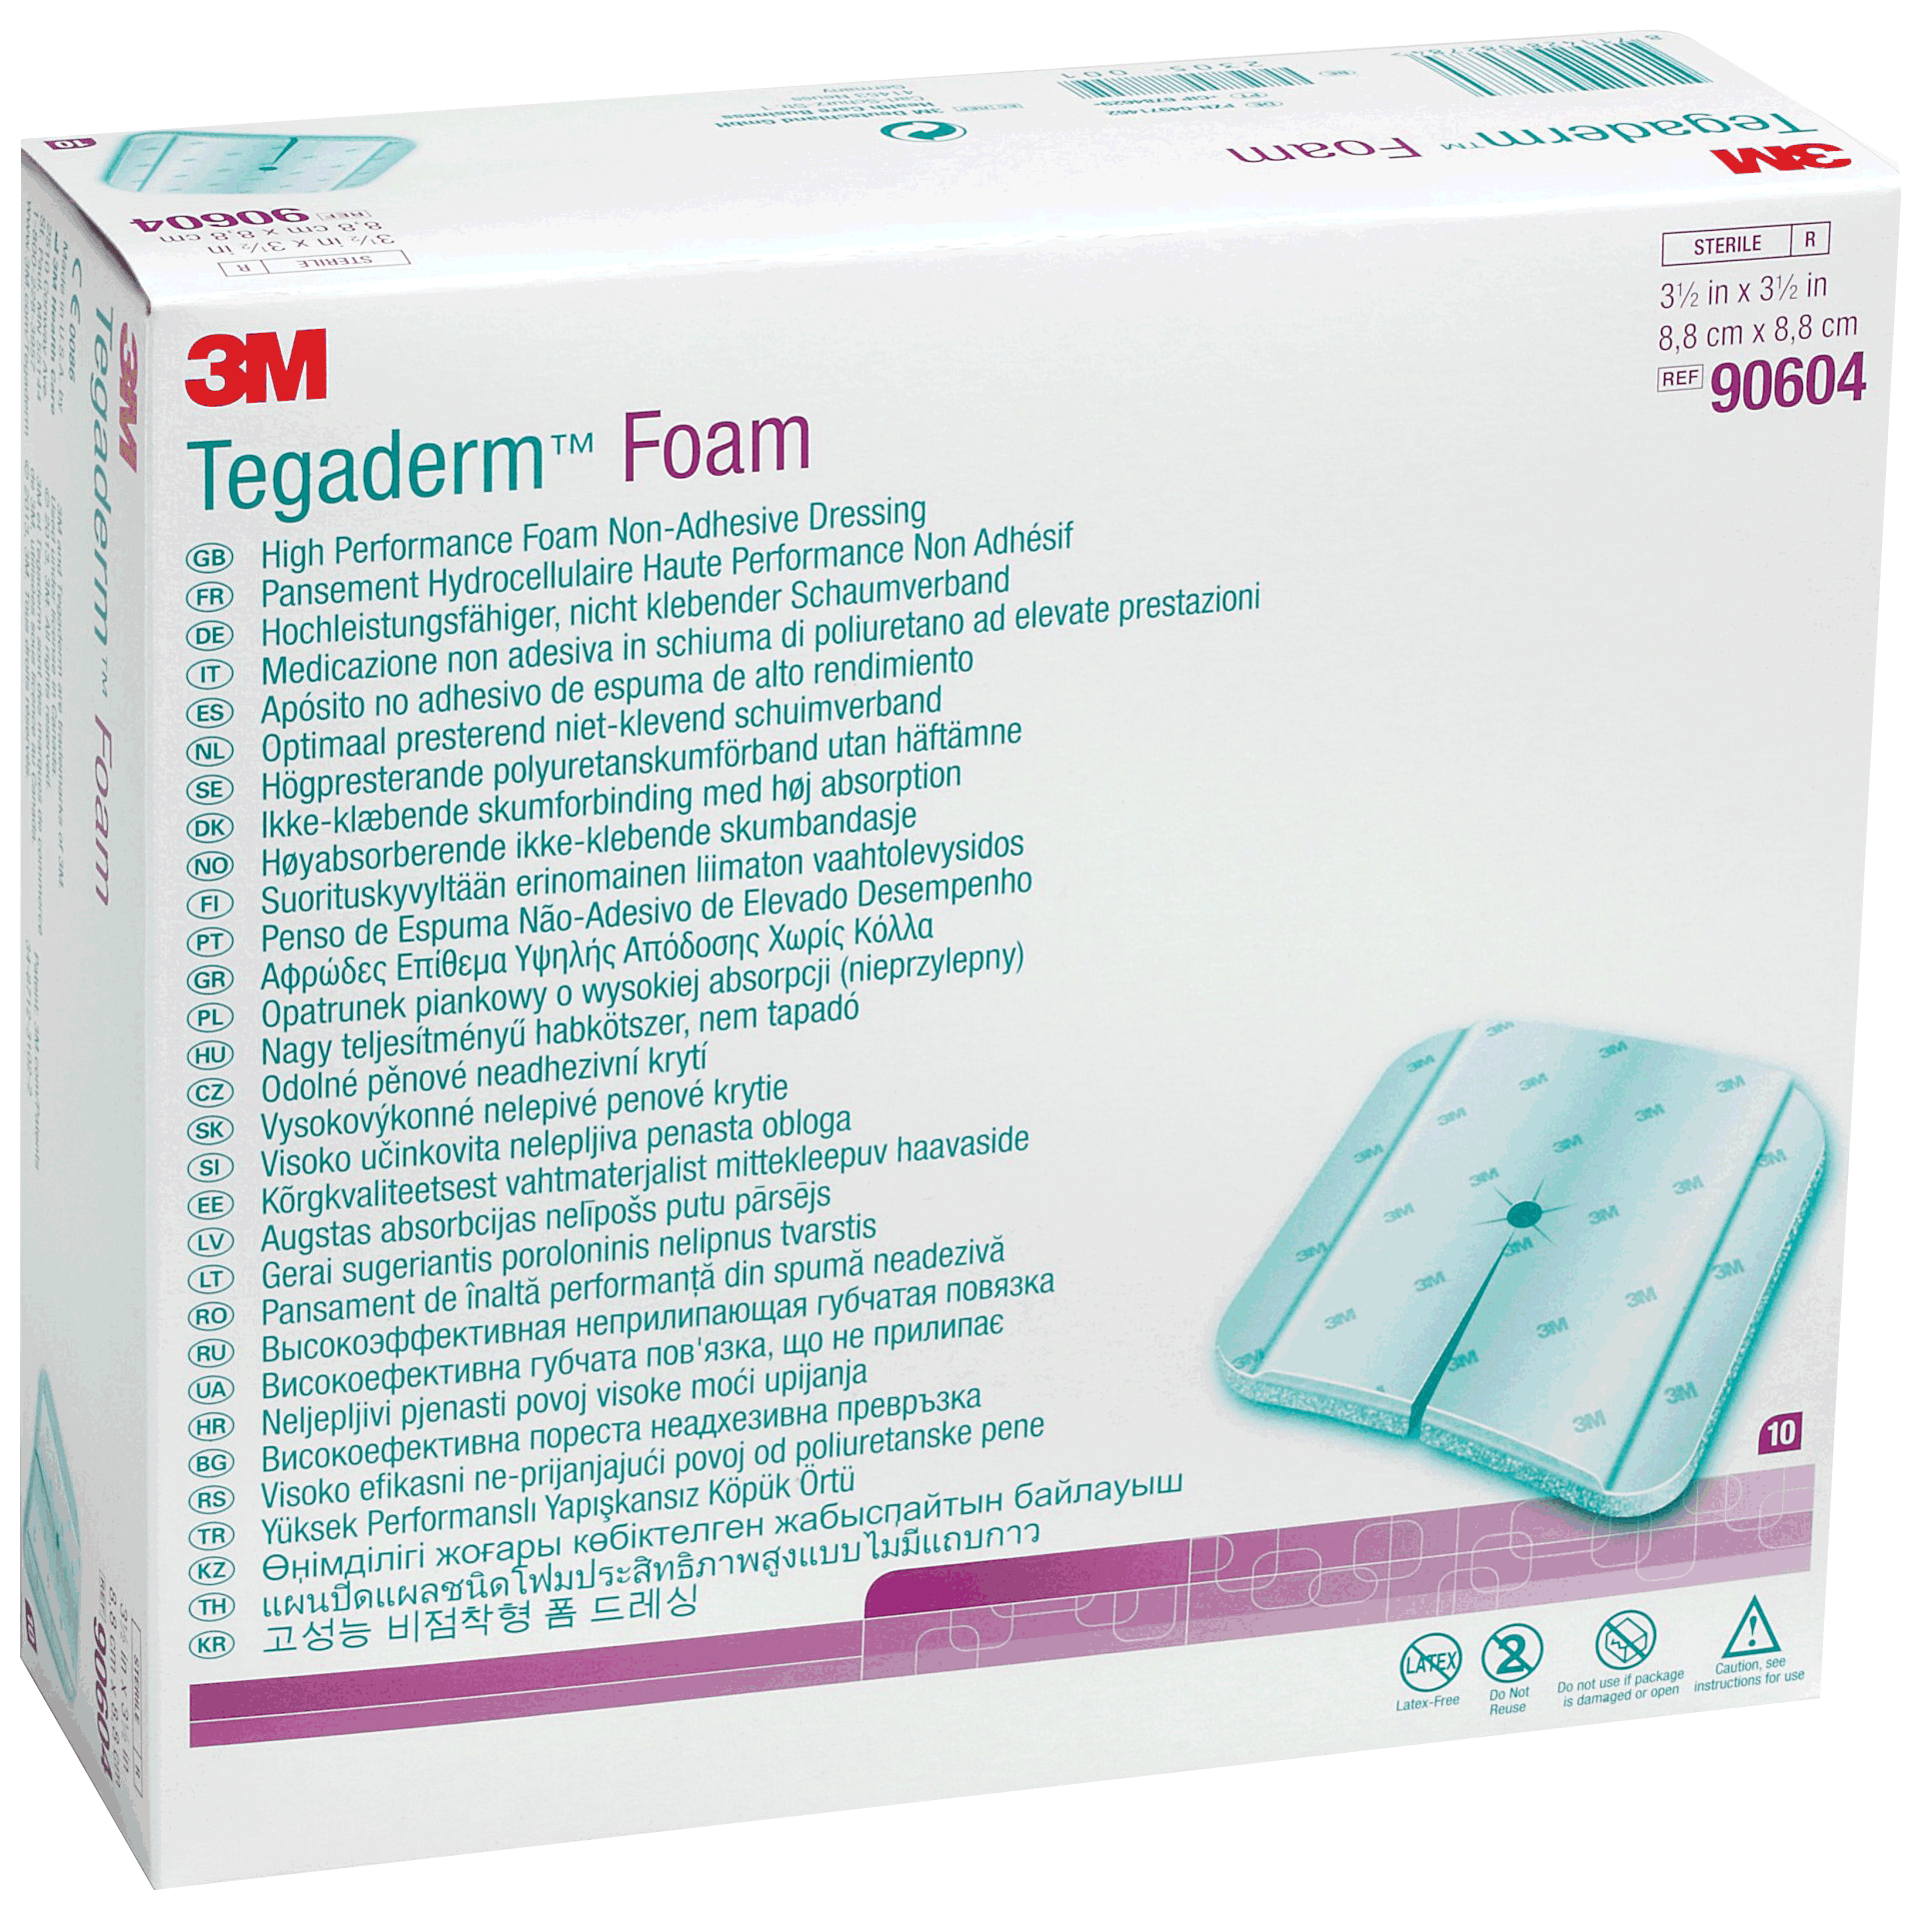 EA/1 - 3M Tegaderm&trade; Foam Dressing, Non-Adhesive, 4" x 8" - Best Buy Medical Supplies